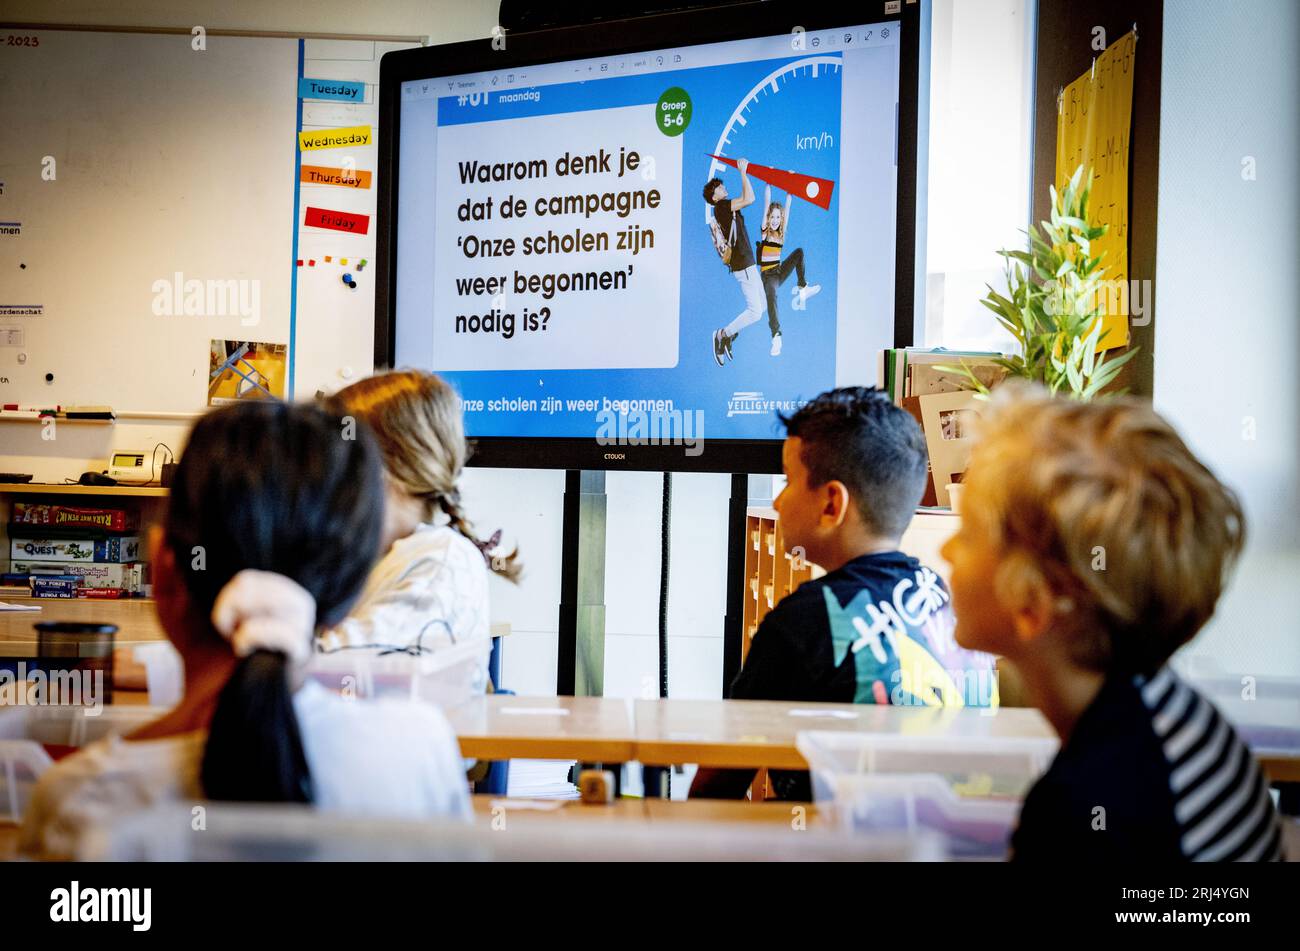 BERKEL EN RODENRIJS - At De Gouden Griffel primary school, the go-ahead is given for the VVN campaign 'Our schools have started again'. Primary and secondary schools in the center of the country are starting again after six weeks off. ANP ROBIN UTRECHT netherlands out - belgium out Stock Photo